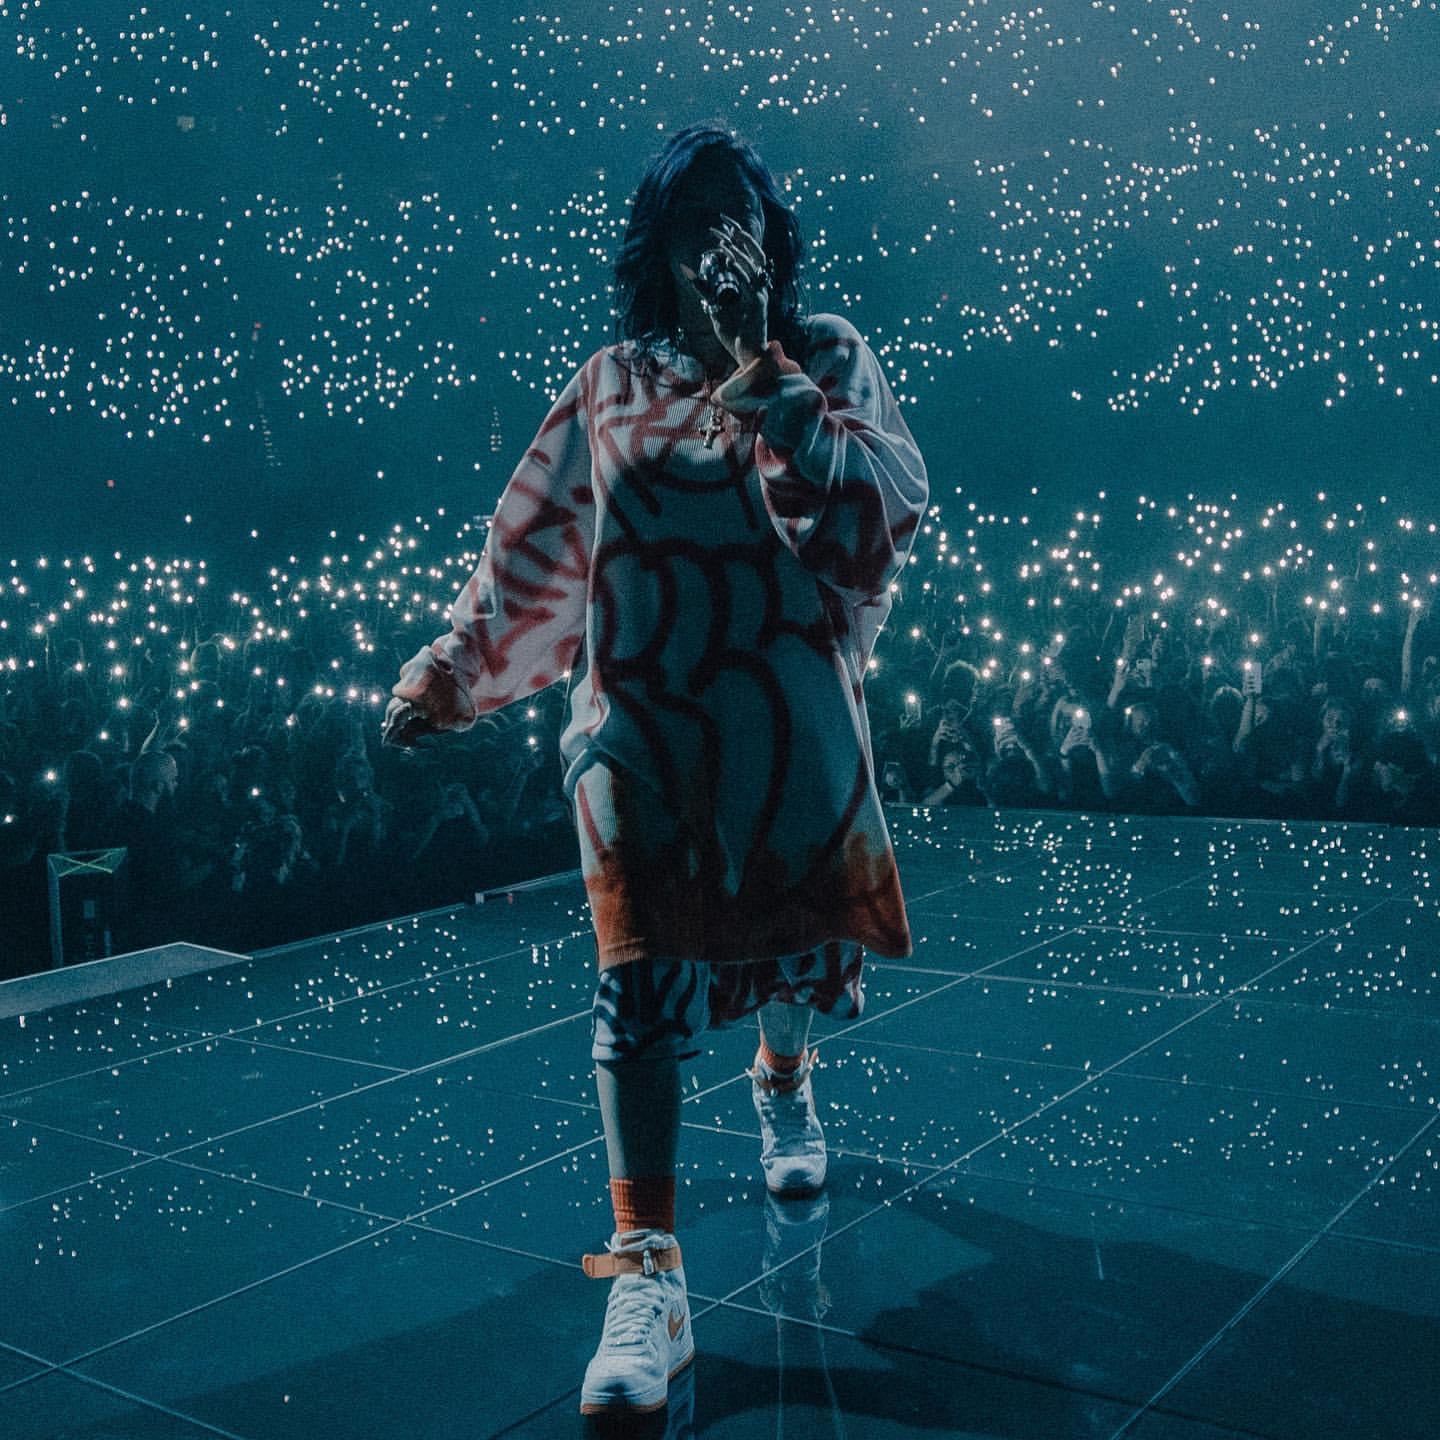 Billie Eilish for Android